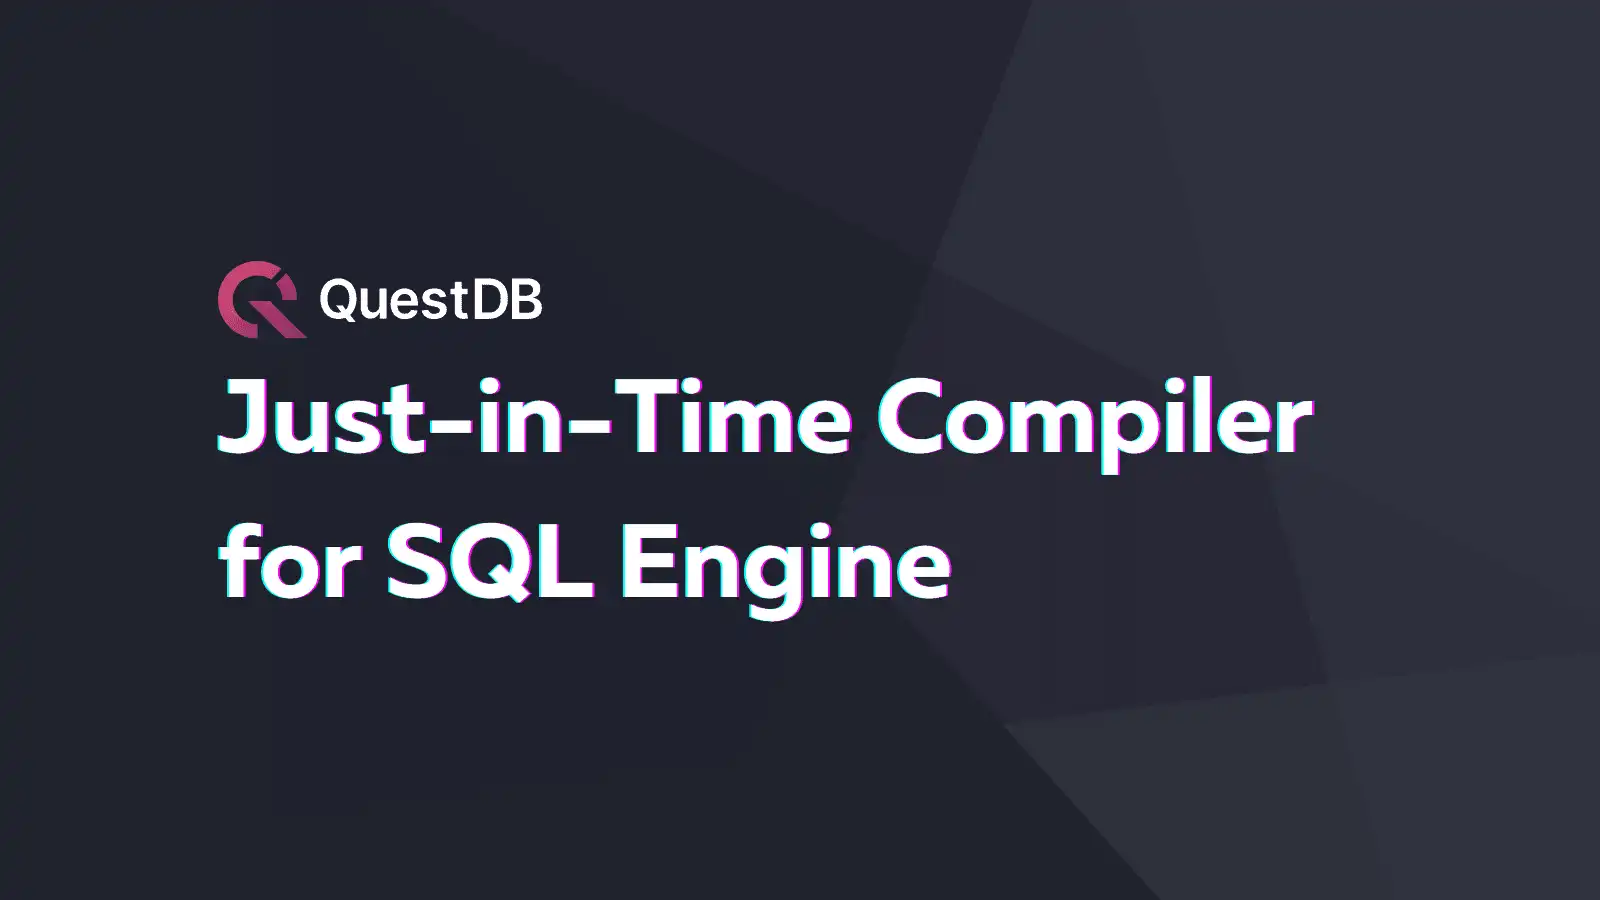 Details of the latest QuestDB version which includes a JIT compiler for the SQL engine